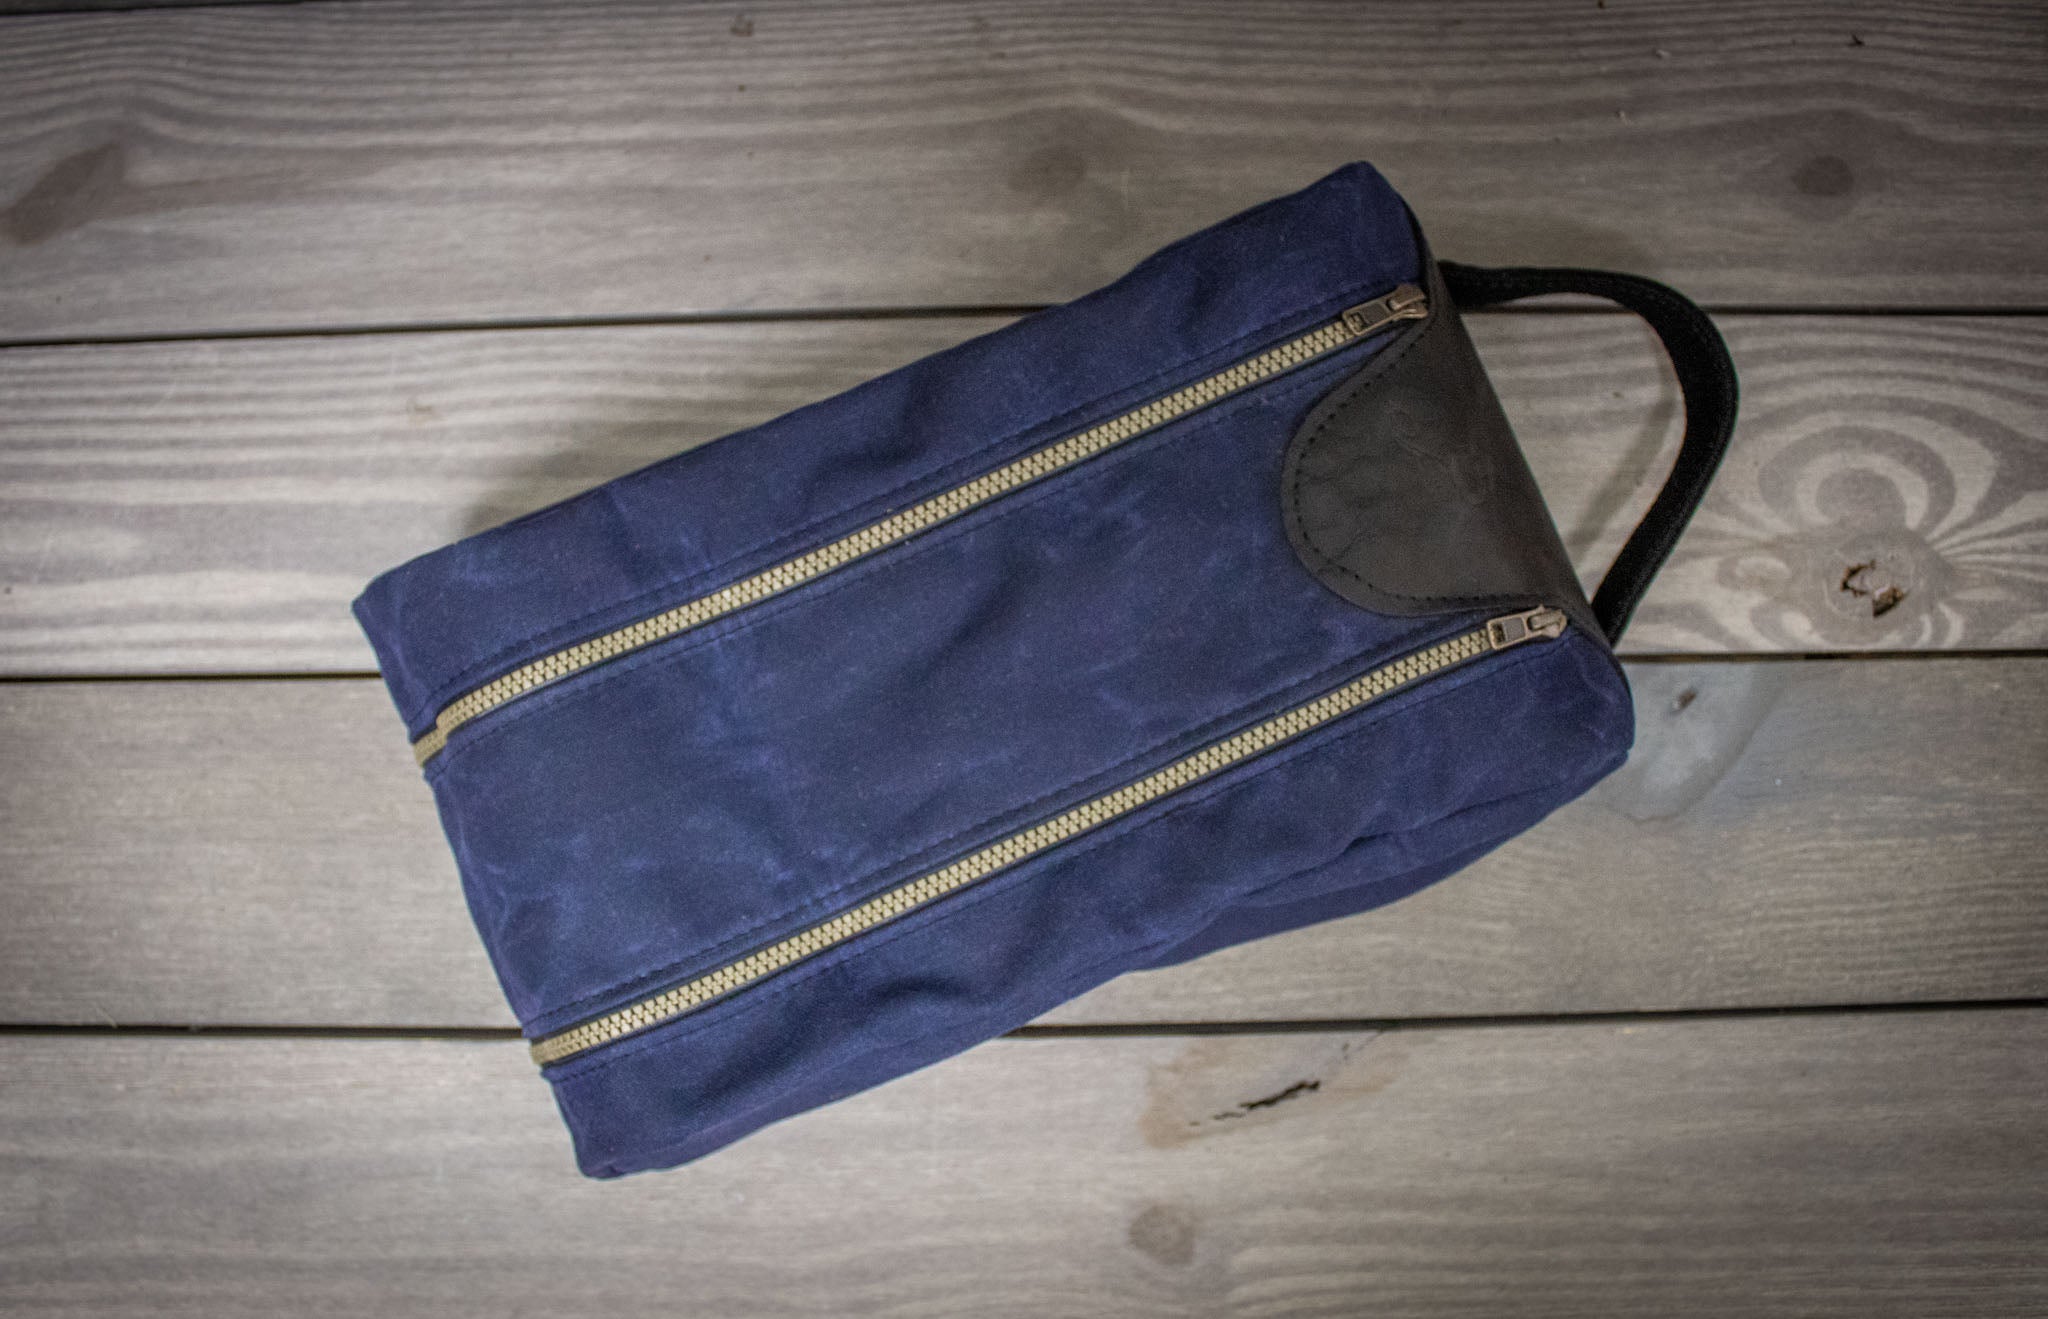 Navy and Black Leather Shoe Bag- Steurer & Jacoby